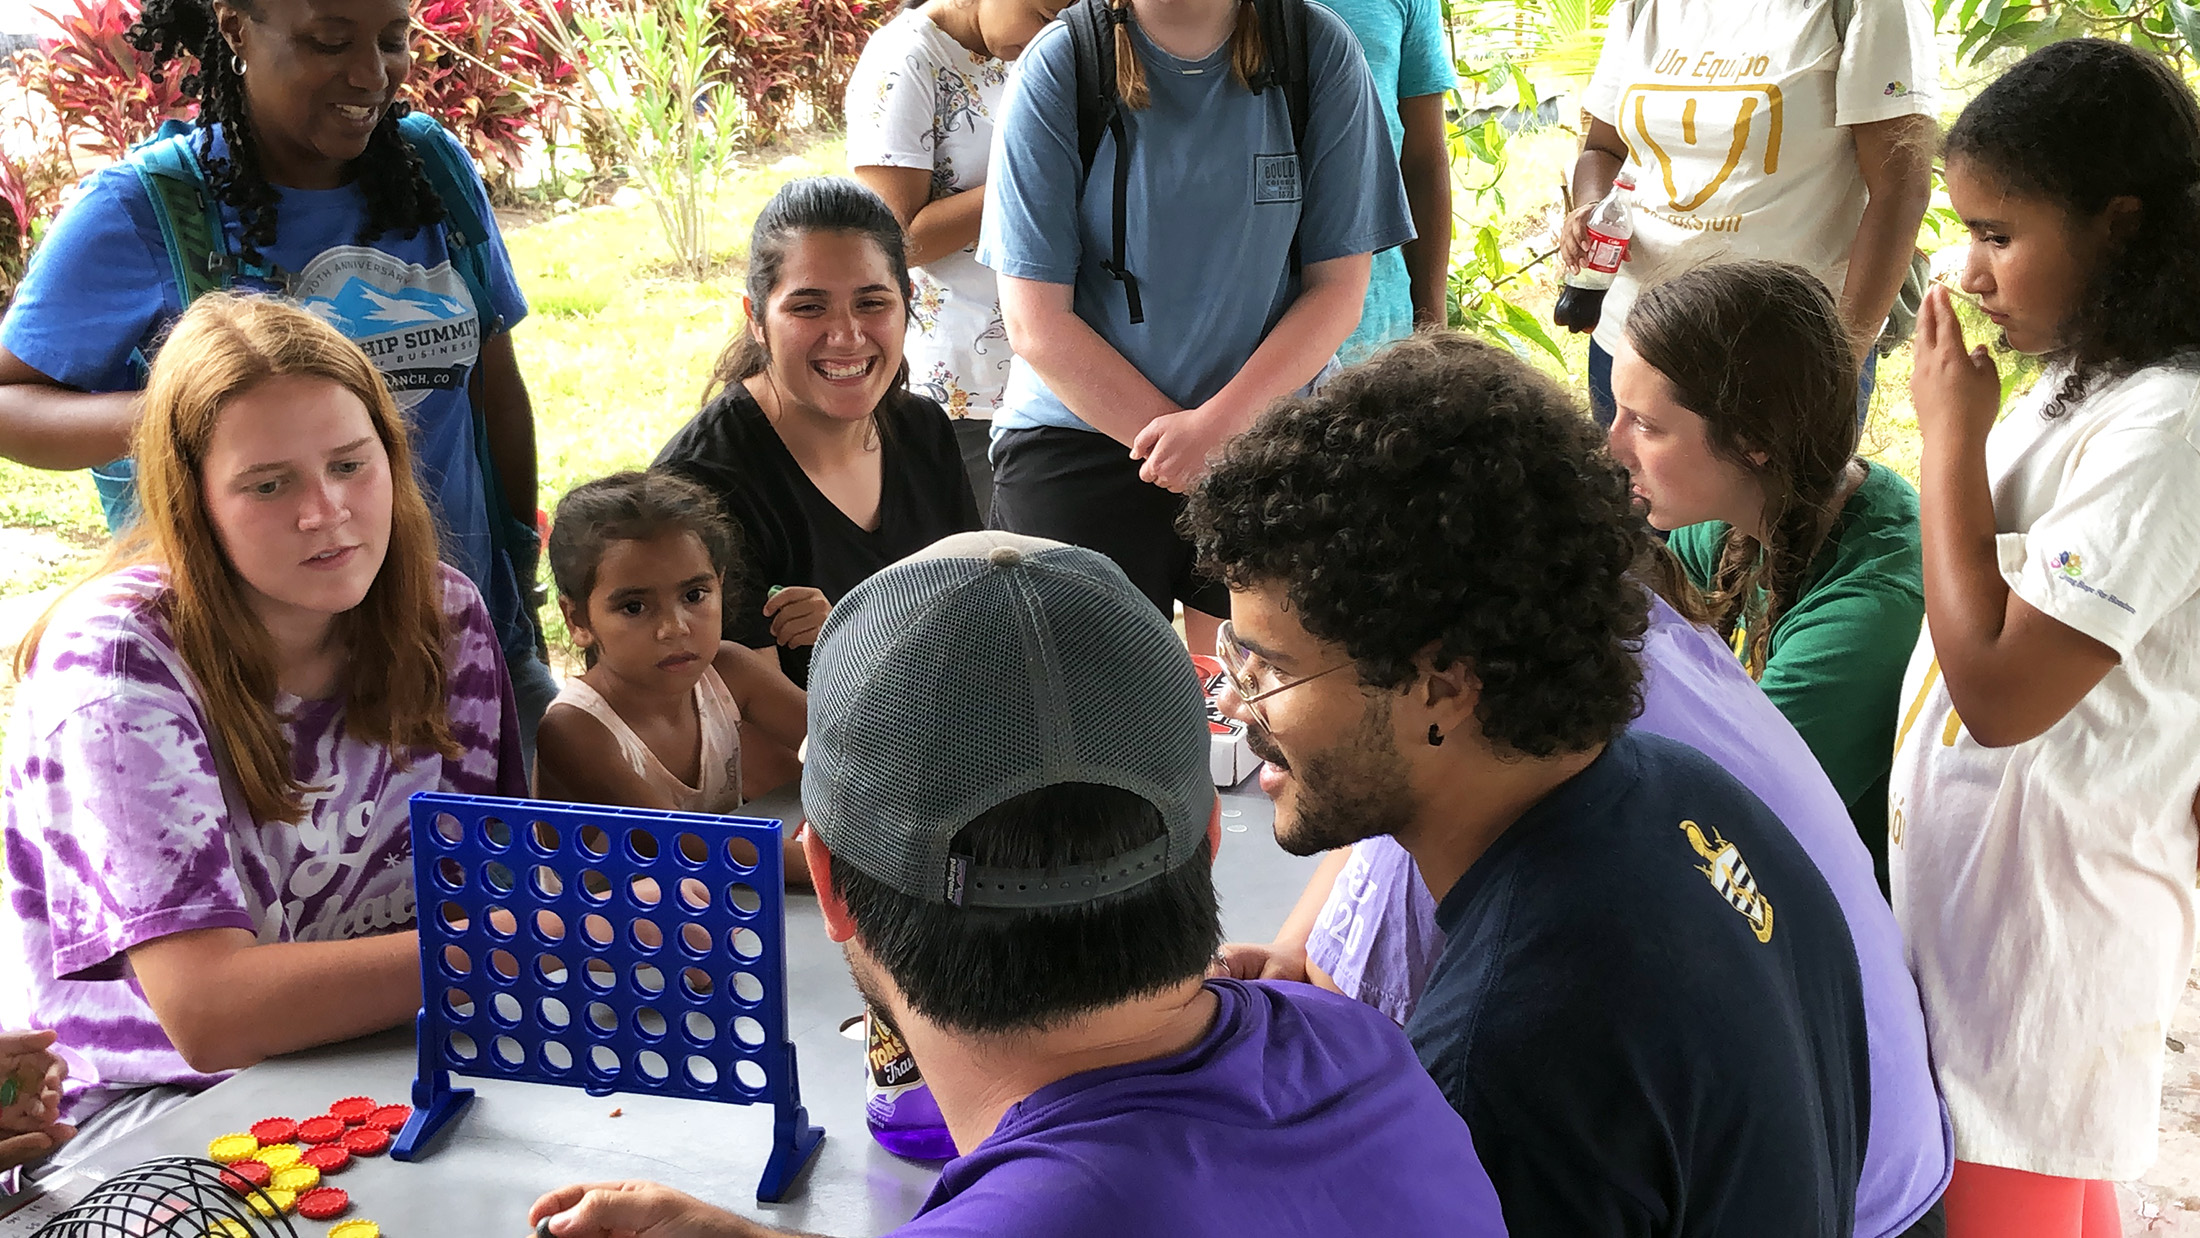 ACU students play with the girls at Nanny’s Casa, one of the homes operated by Living Hope. Pictured here are Chelsey Powers, Maggie Eich and Victoria Cheshire (from left back), and Josh Beck and Nate Hartin (from left front).